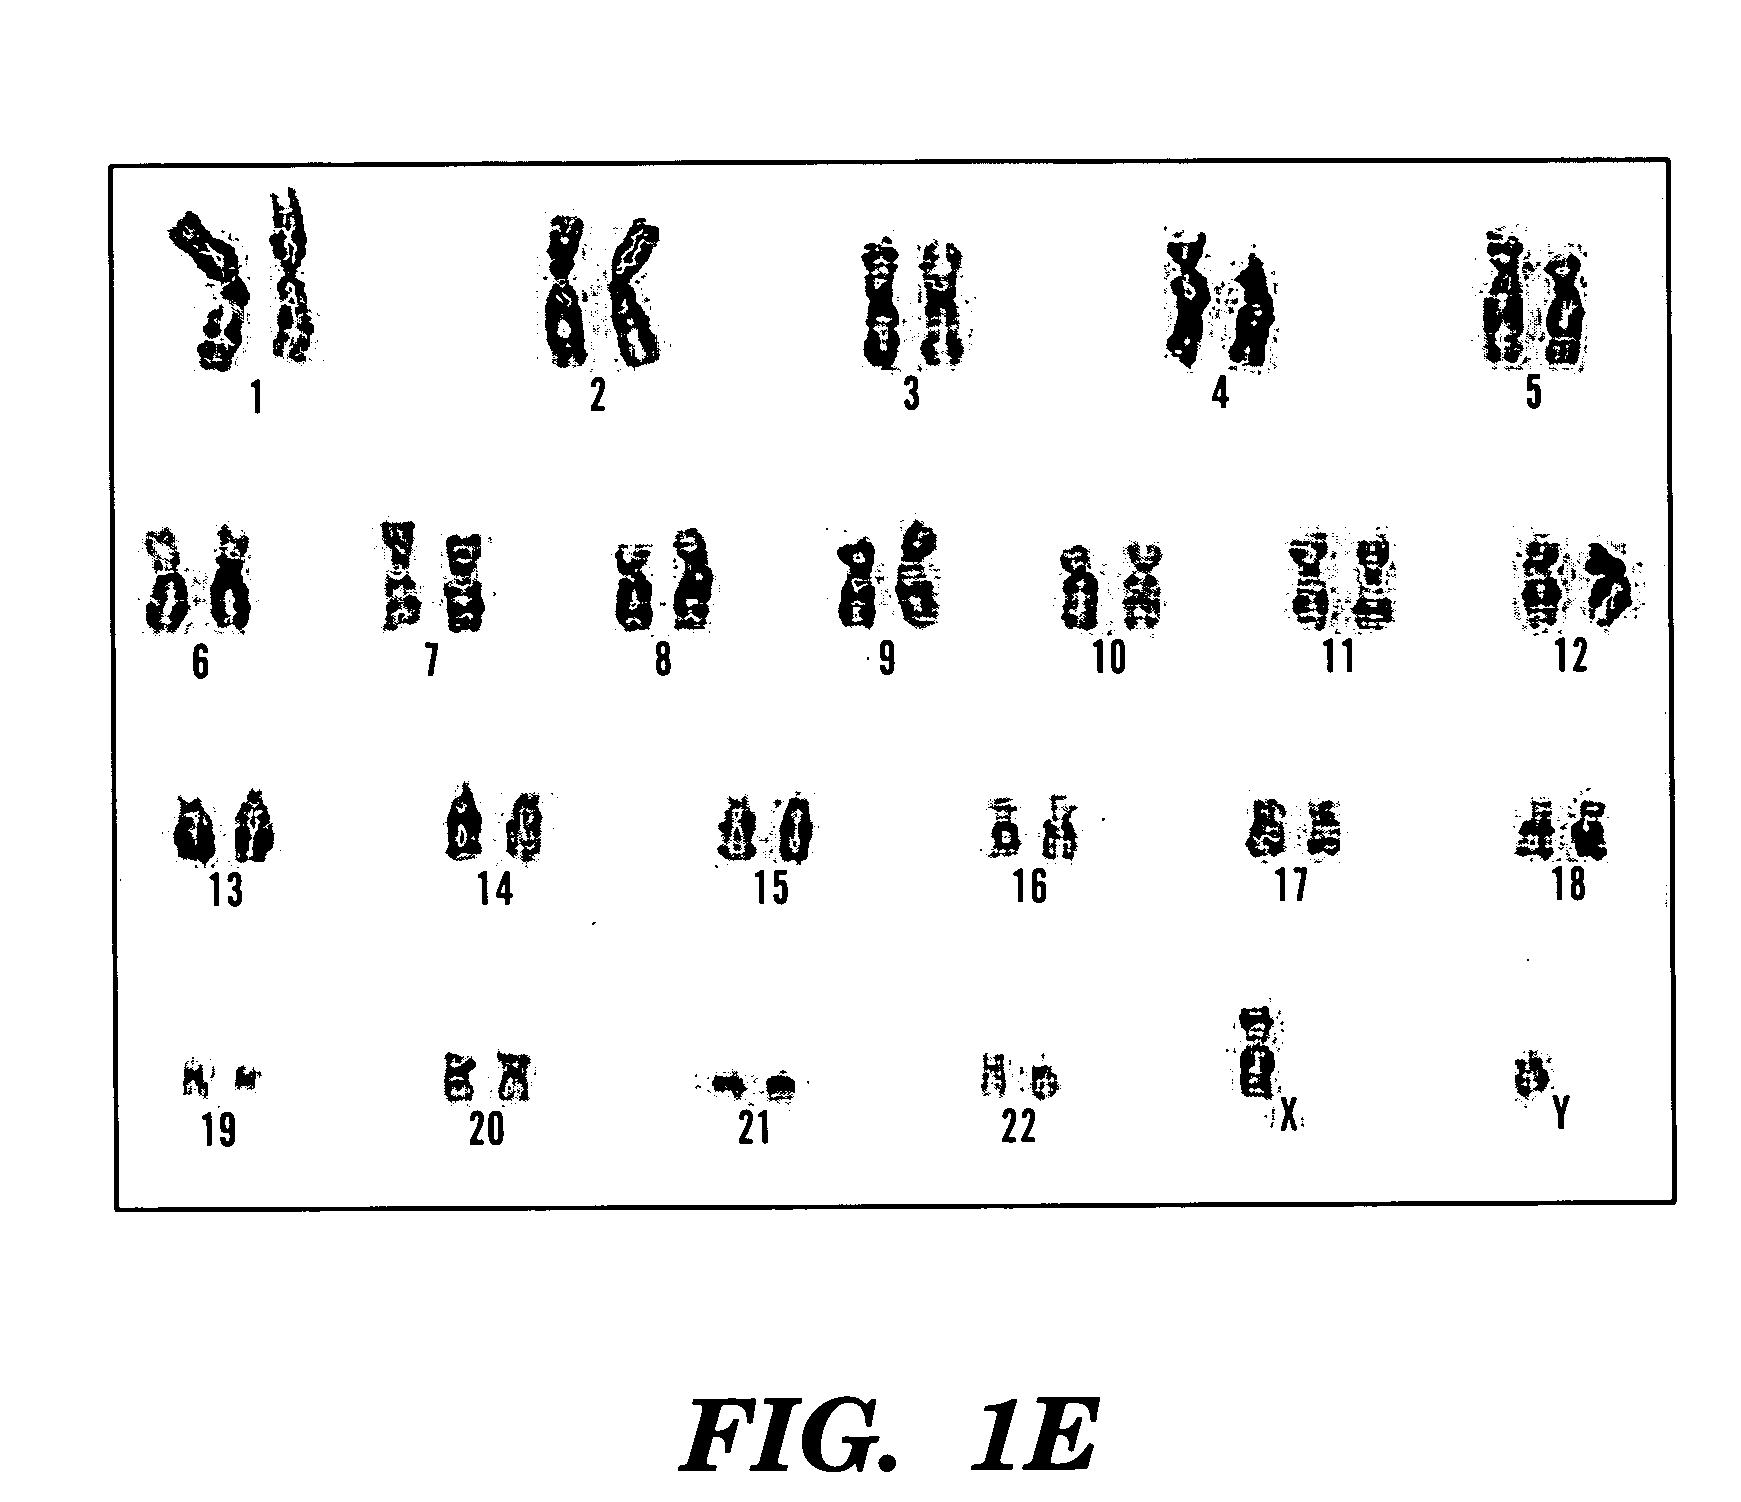 Methods of isolation, expansion and differentiation of fetal stem cells from chorionic villus, amniotic fluid, and placenta and therapeutic uses thereof